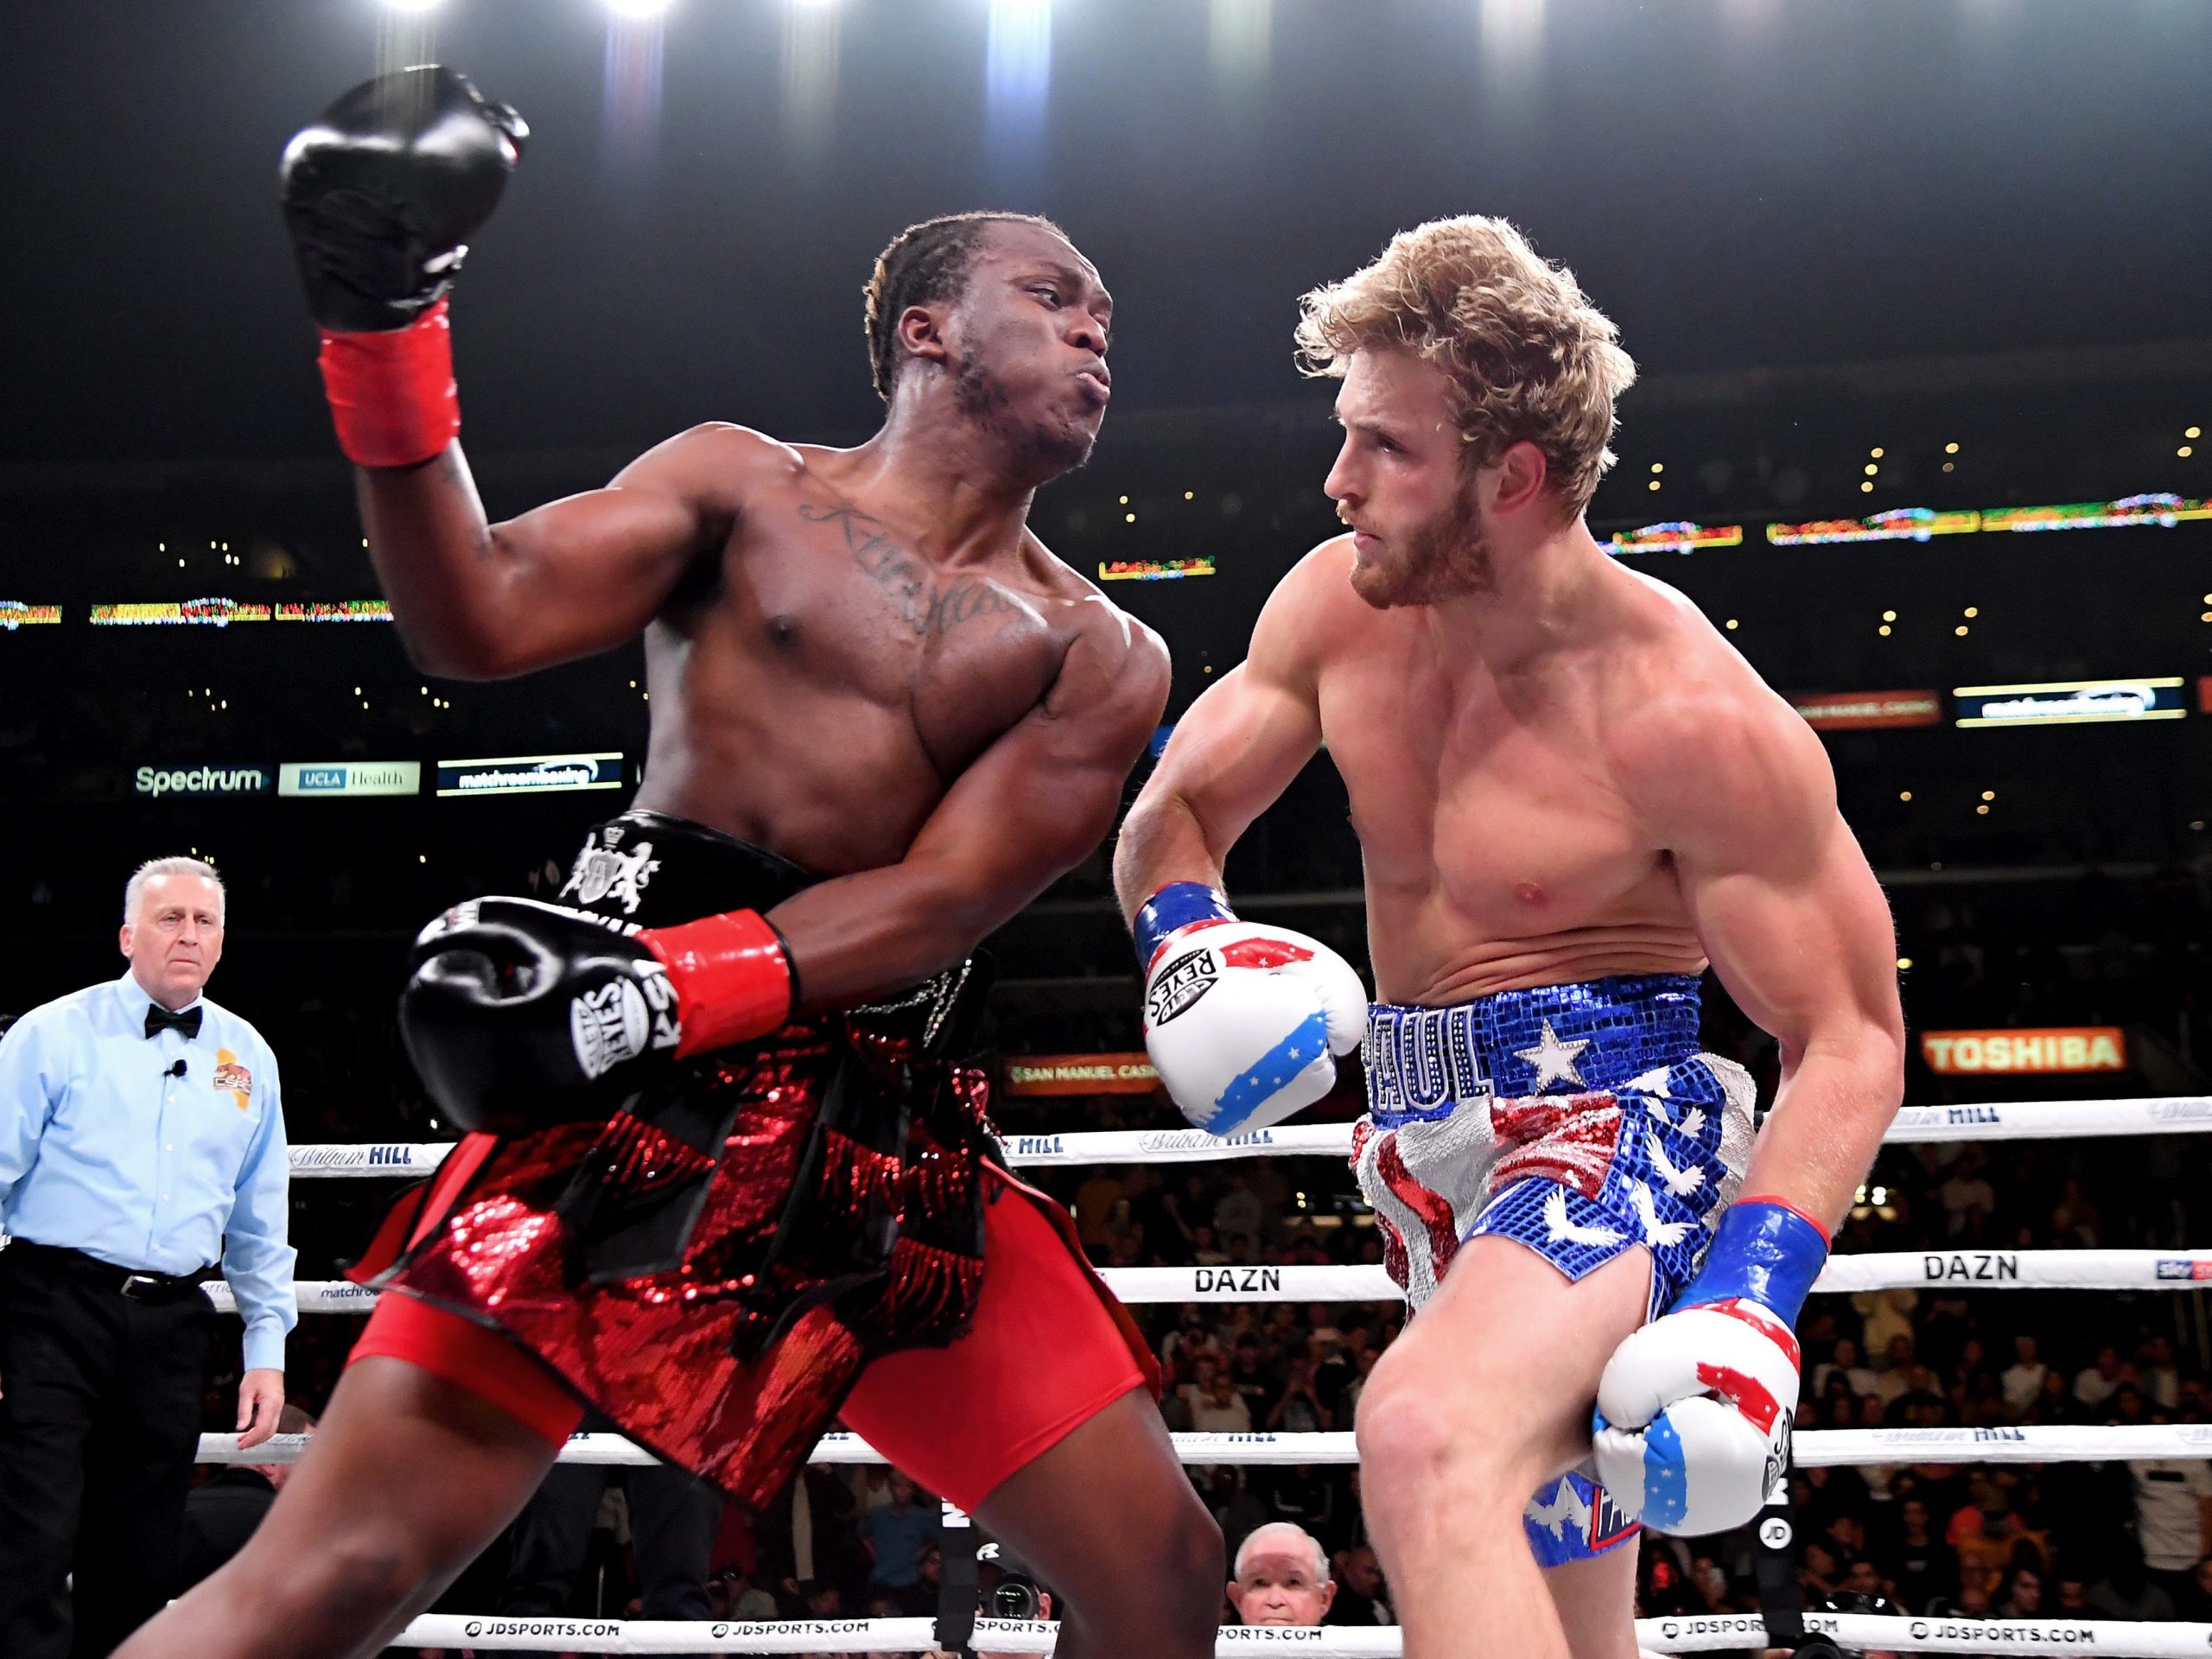 Logan Paul (red/white/blue shorts) and KSI (black/red shorts) exchange punches their pro debut cruiserweight fight at Staples Center on November 9, 2019 in Los Angeles, California. KSI won by decision.